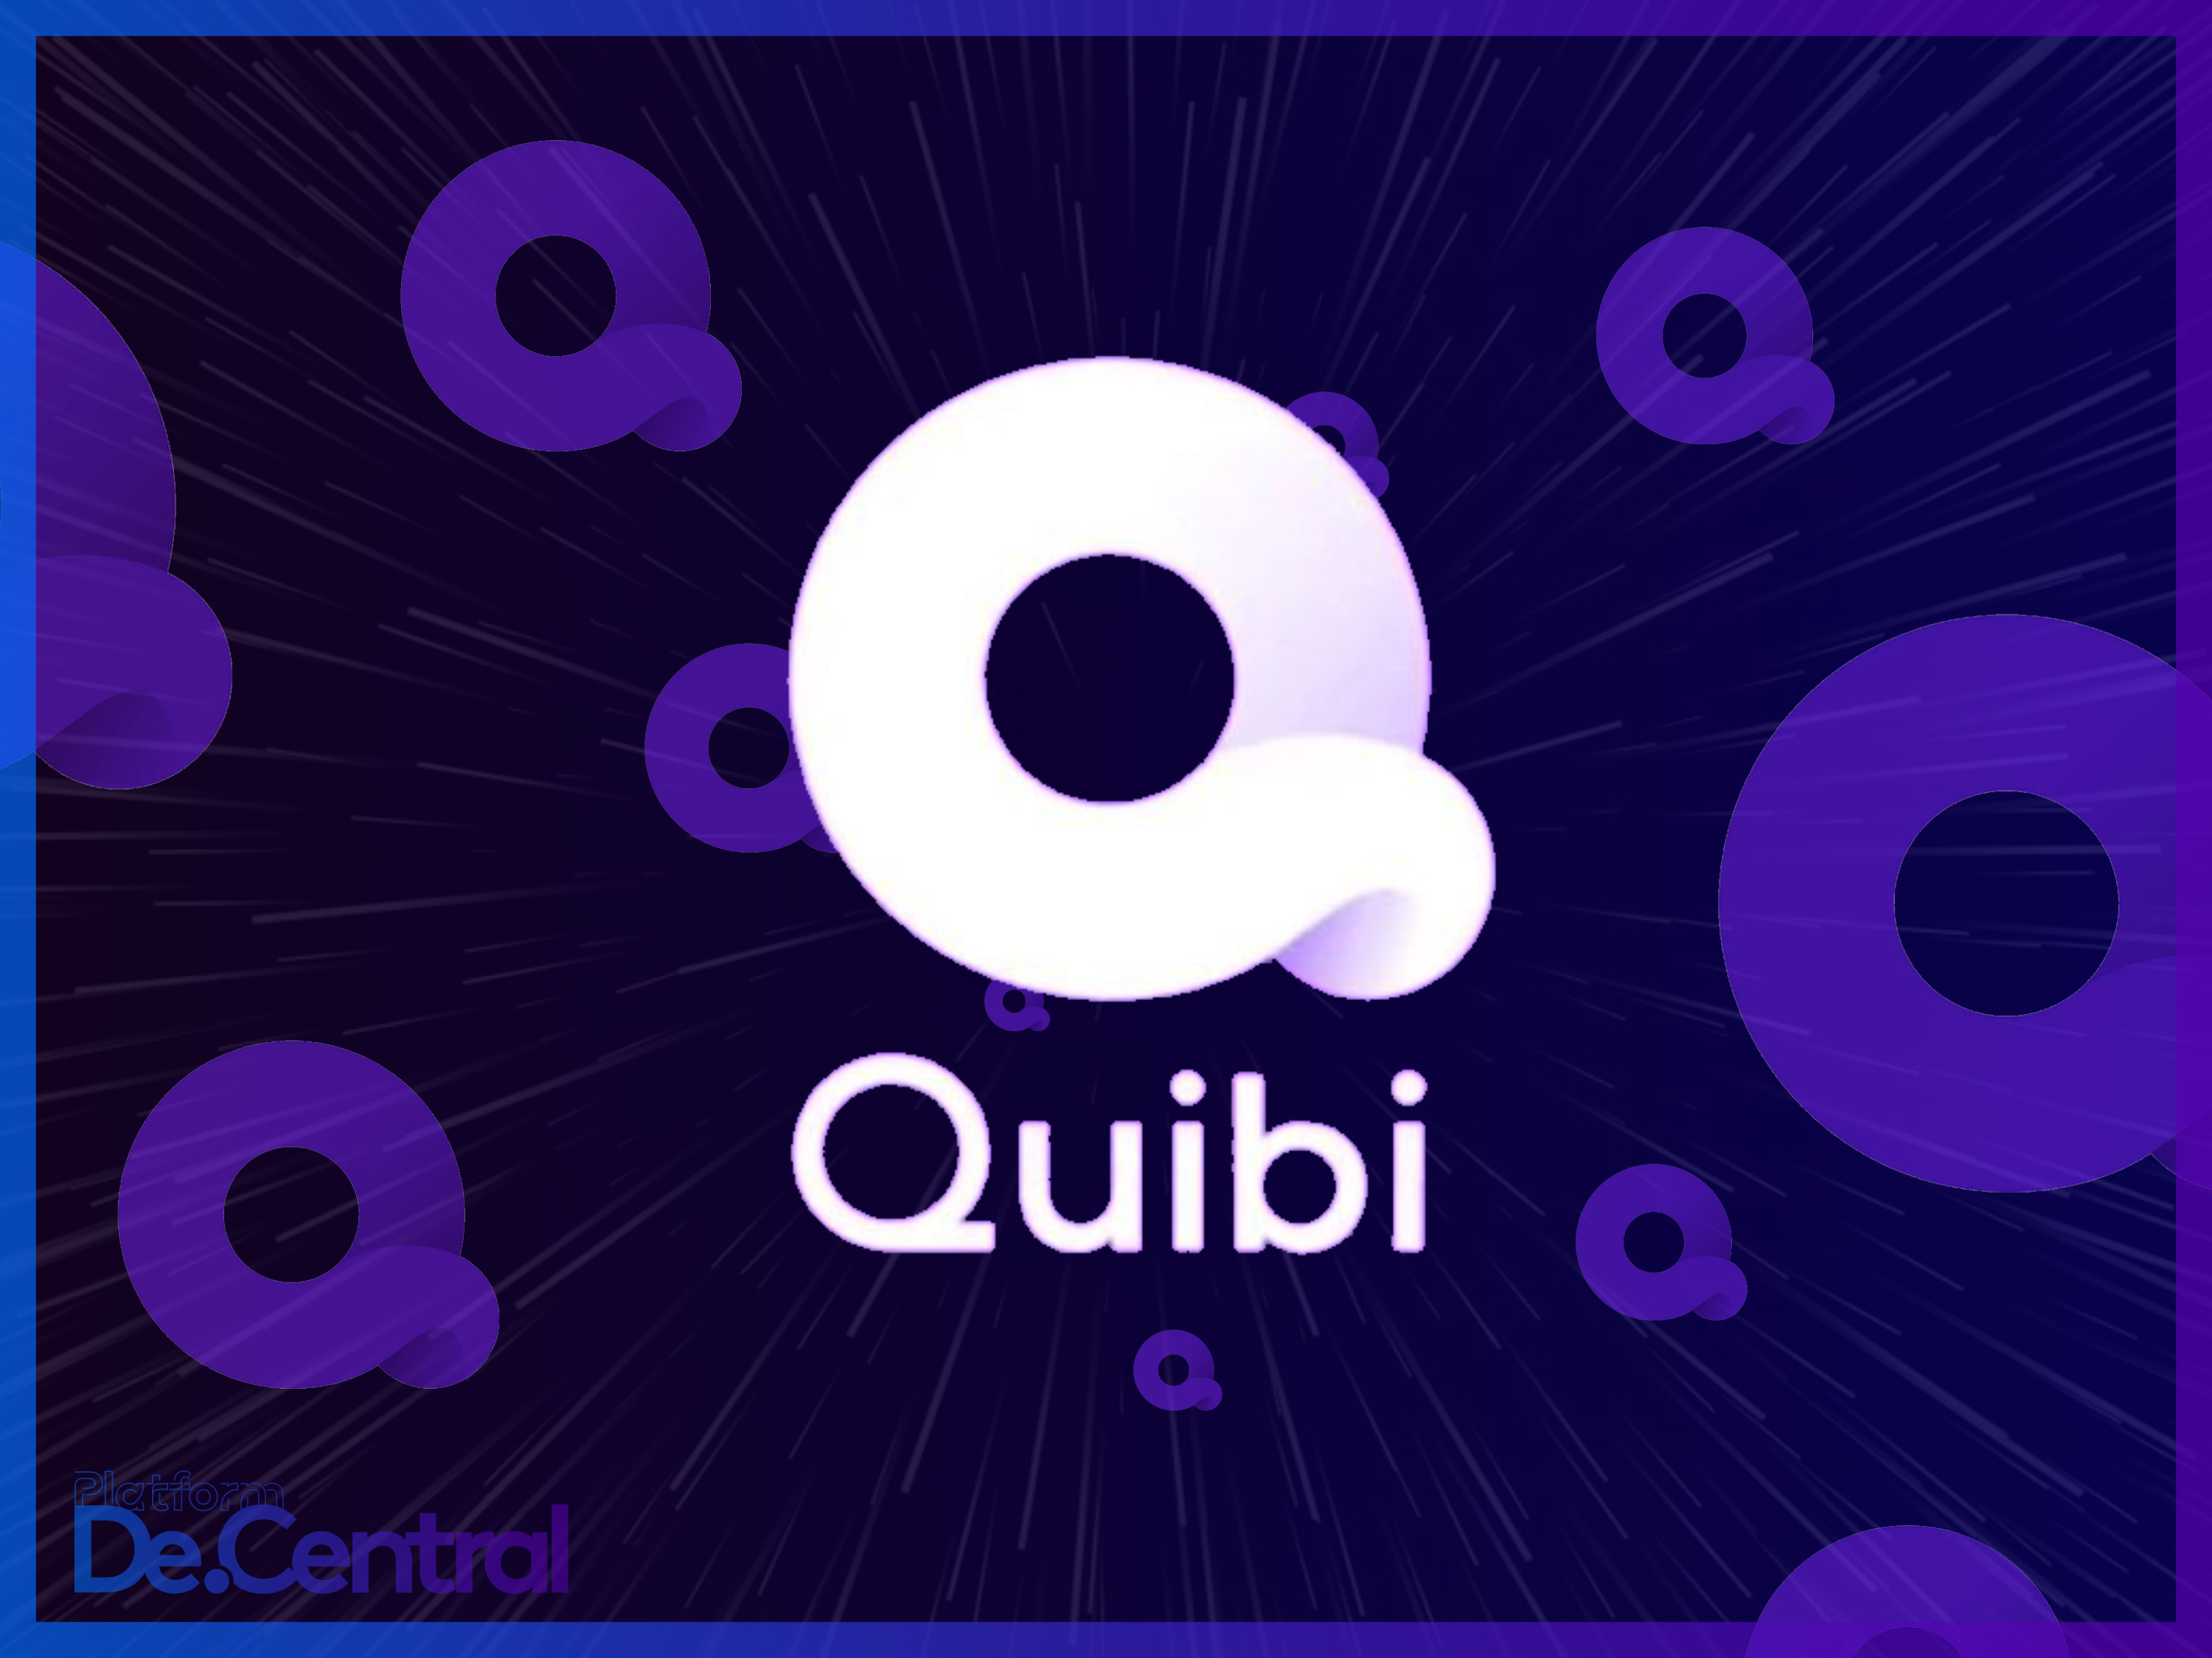 Quibi to add direct sharing of clips to social media apps and more